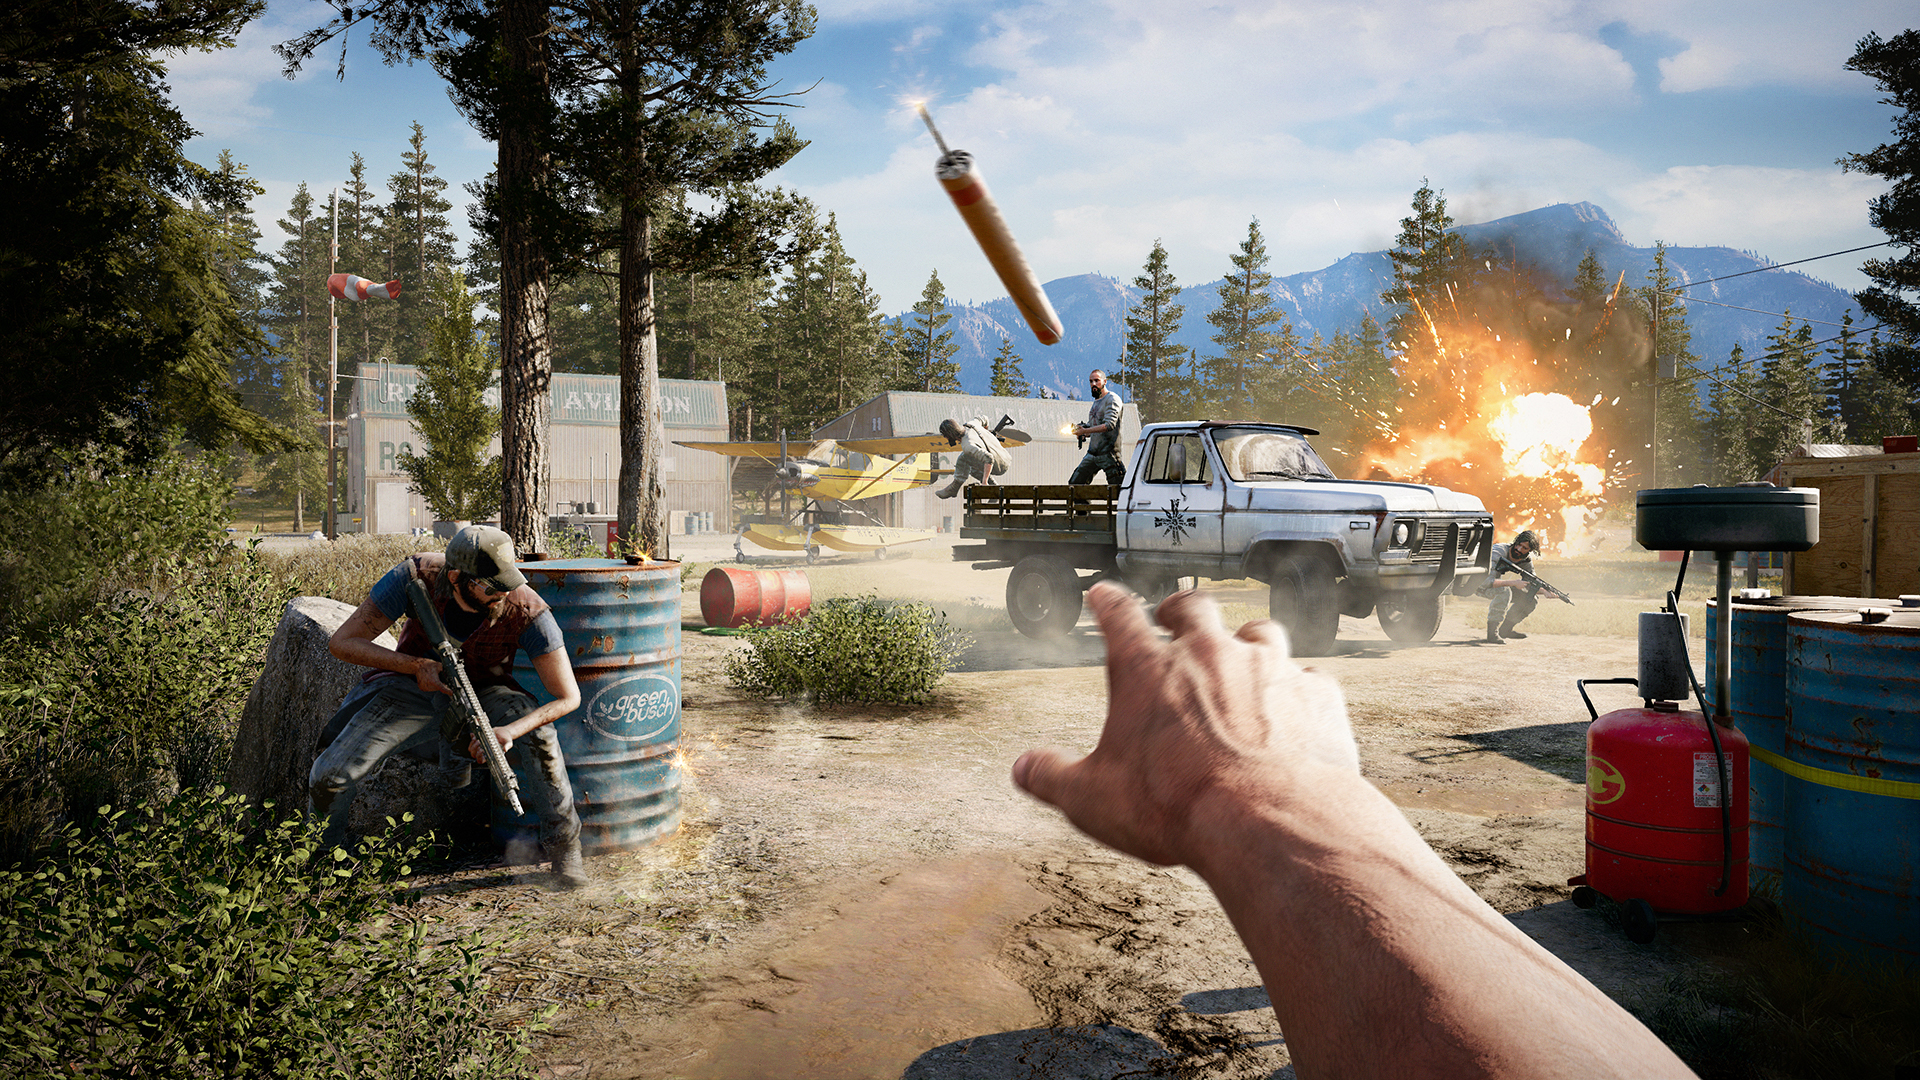 Here are Far Cry 5's system requirements